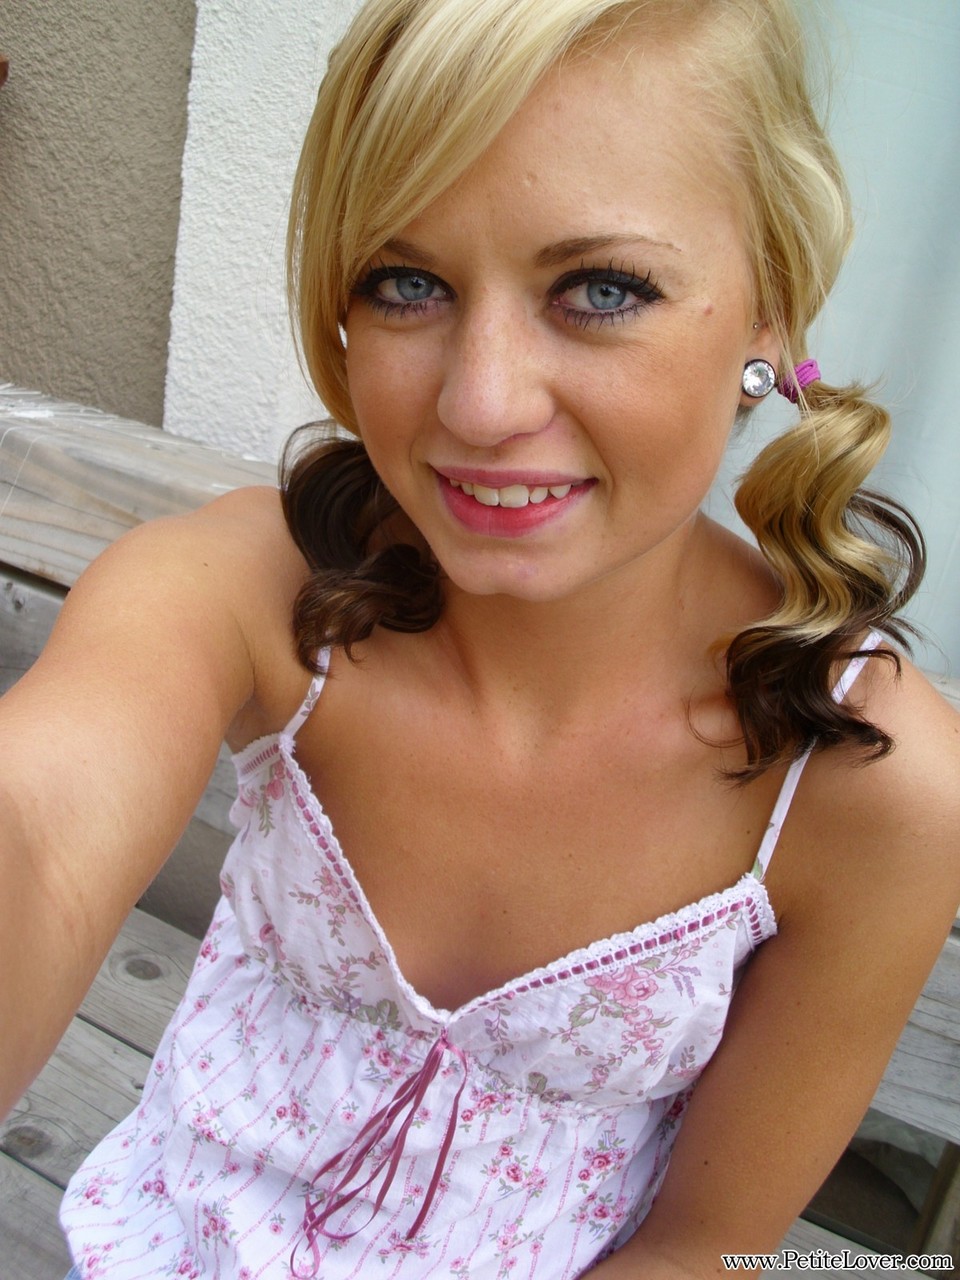 Cute blonde Tiff in pigtails showing off her wee small tits & tiny bald pussy foto porno #428361803 | Petite Lover Pics, Tiff, Amateur, porno mobile